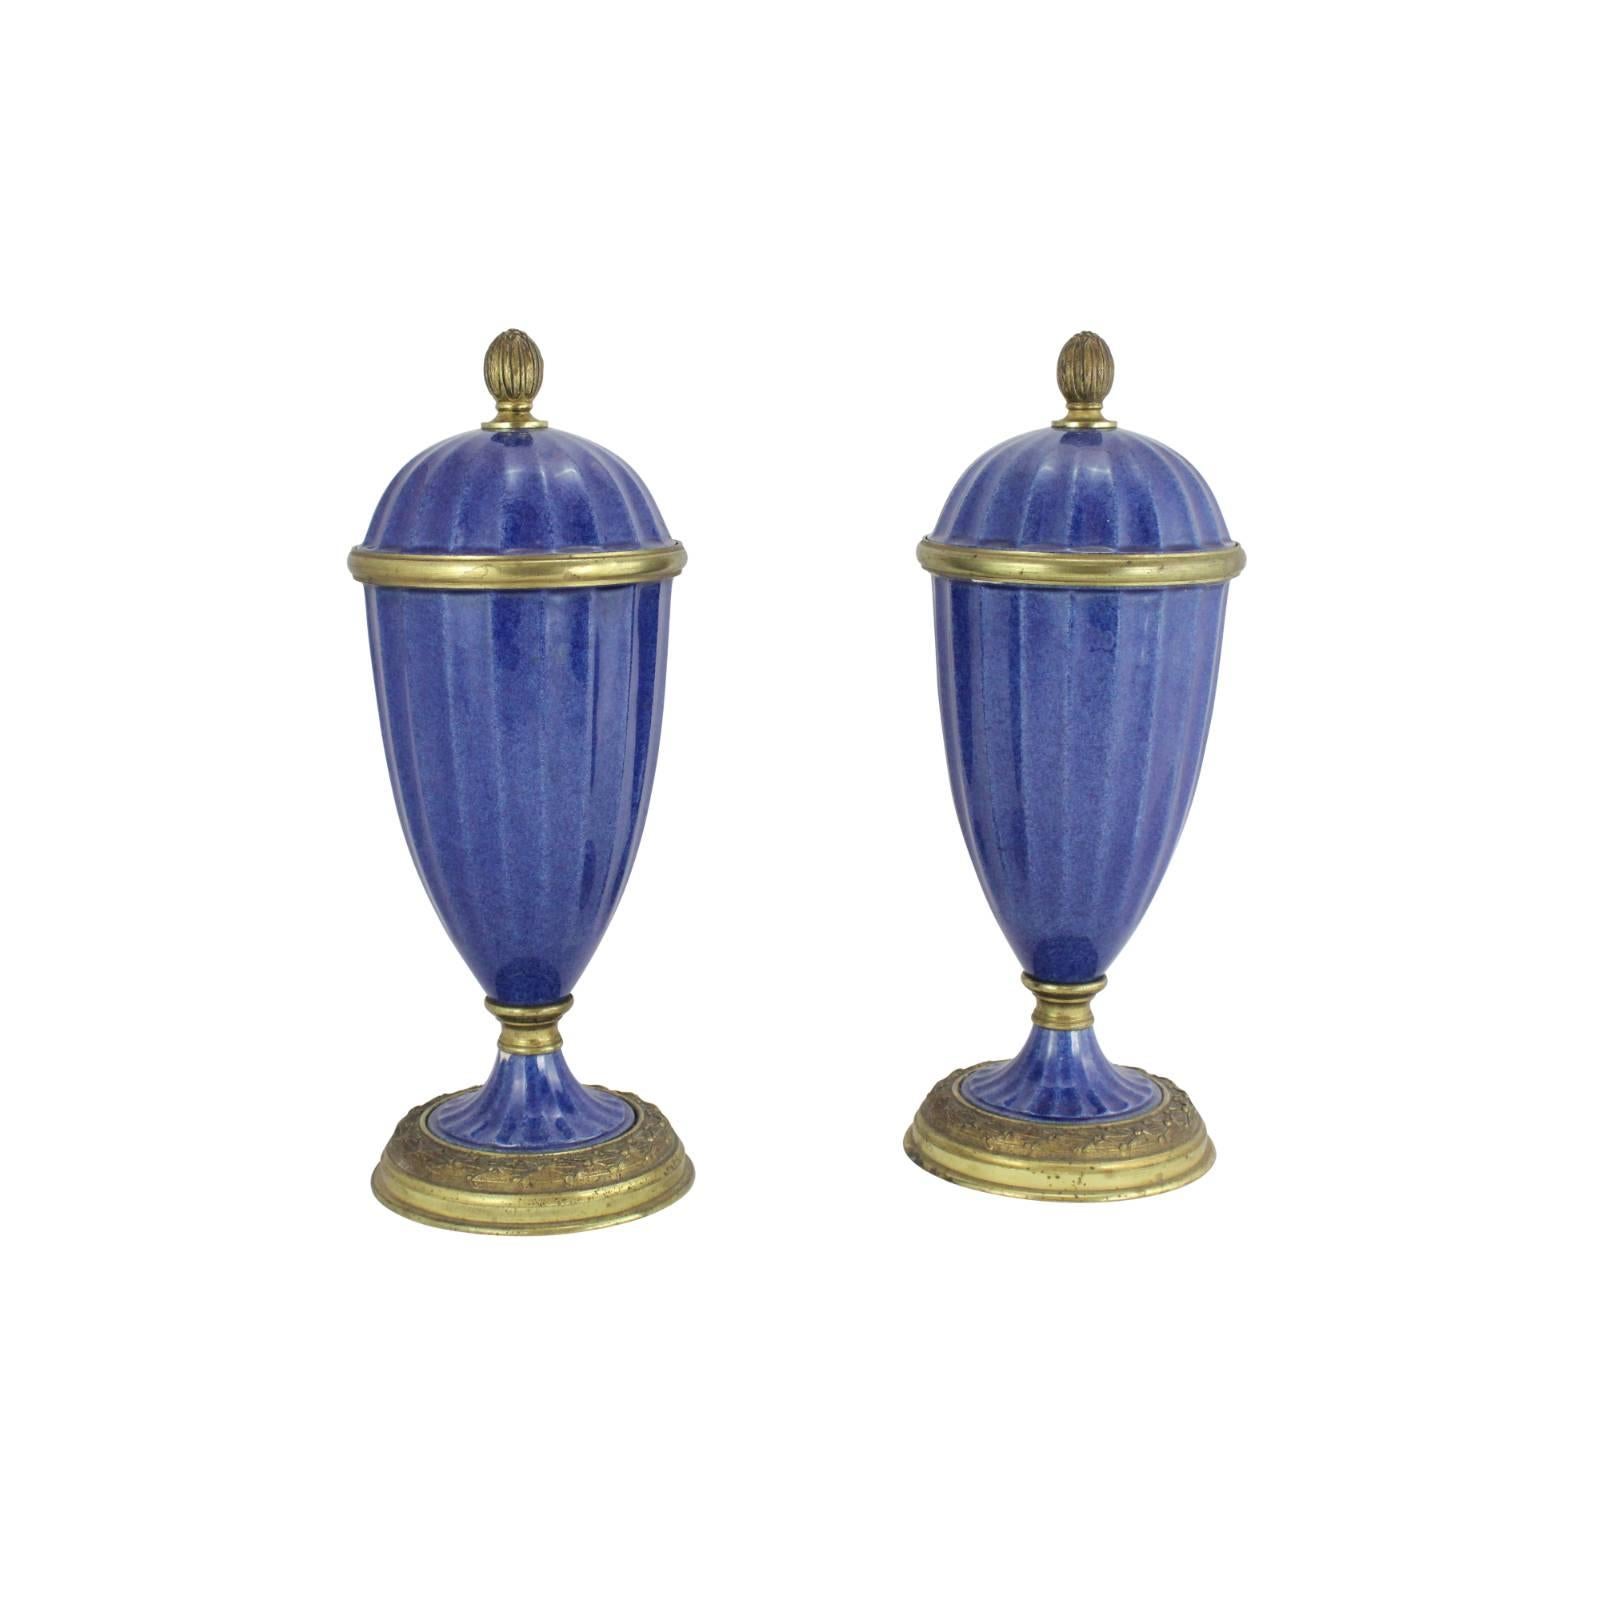 Art Deco Pair of Garniture in Lapis Blue by Paul Milet for Sevres